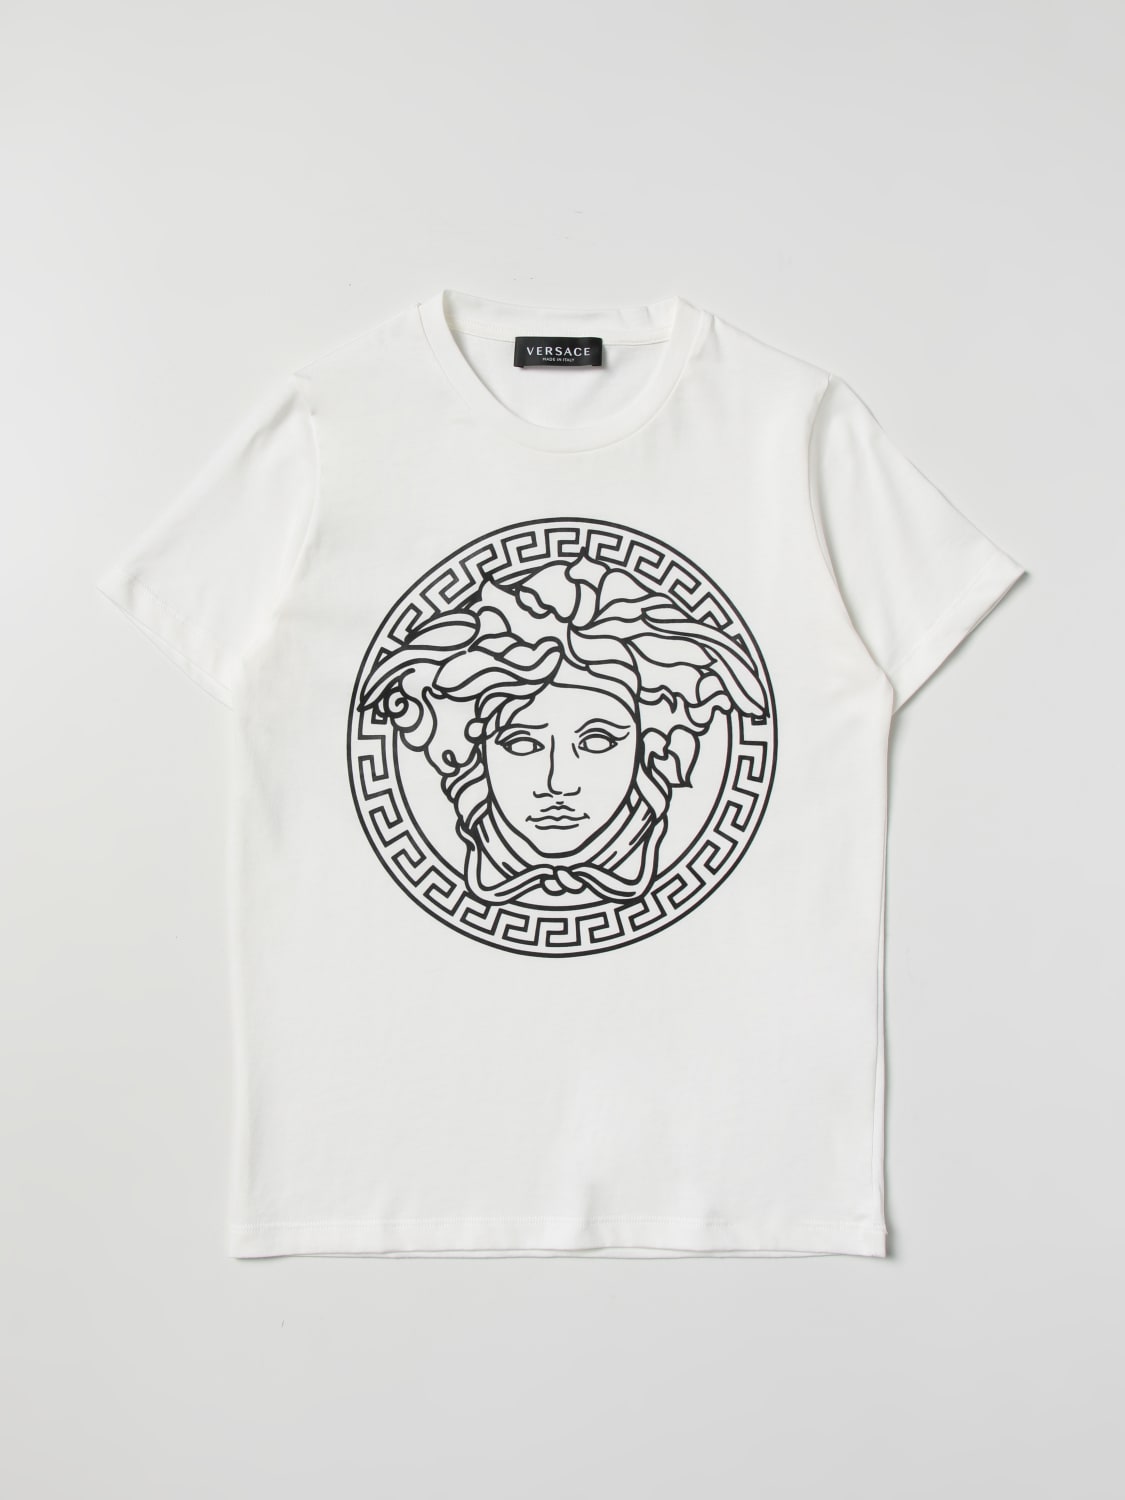 Young Versace Outlet: t-shirt for boys - White  Young Versace t-shirt  10002391A04767 online at